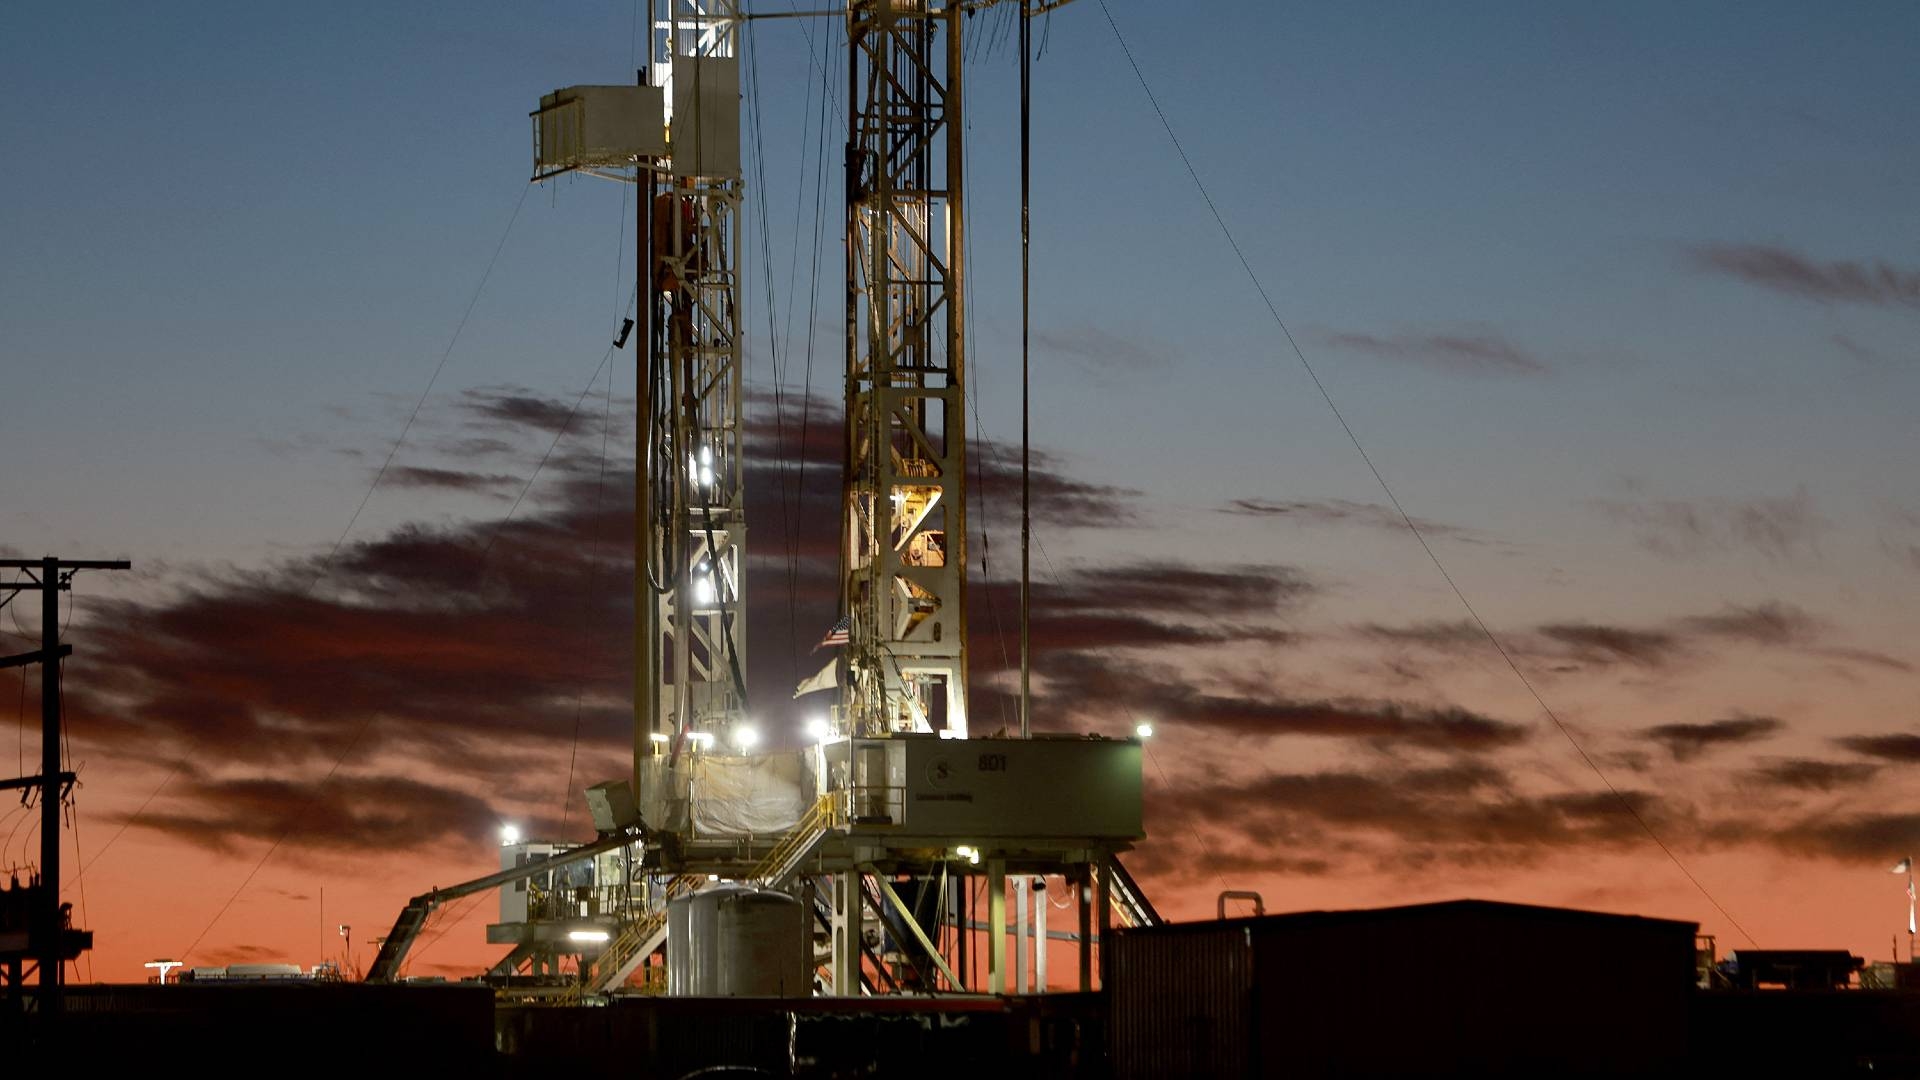 An oil drilling rig setup in the Permian Basin oil field on 13 March 2022 in Midland, Texas.